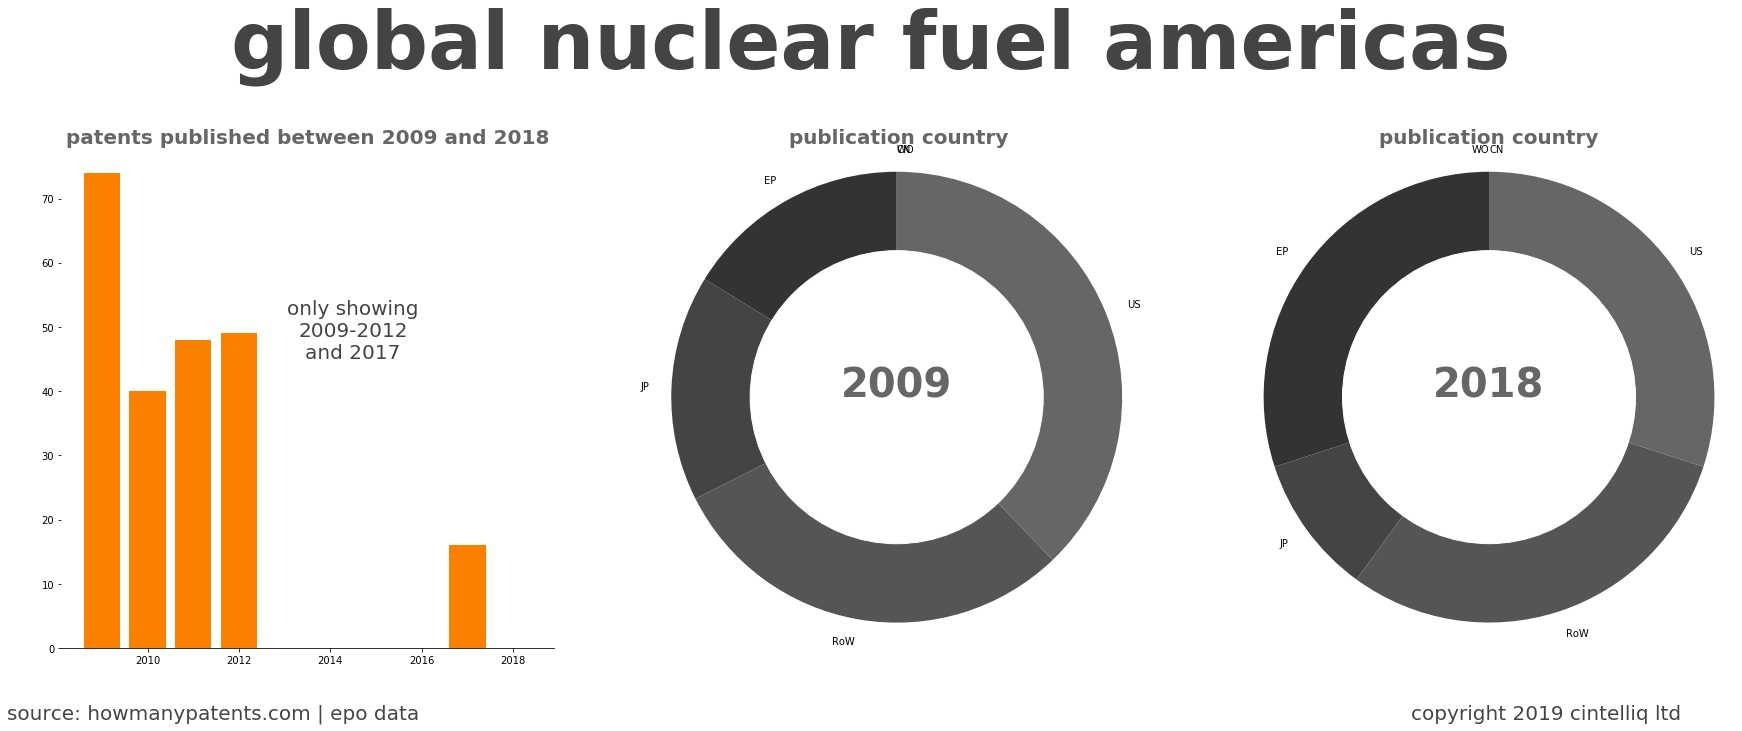 summary of patents for Global Nuclear Fuel Americas